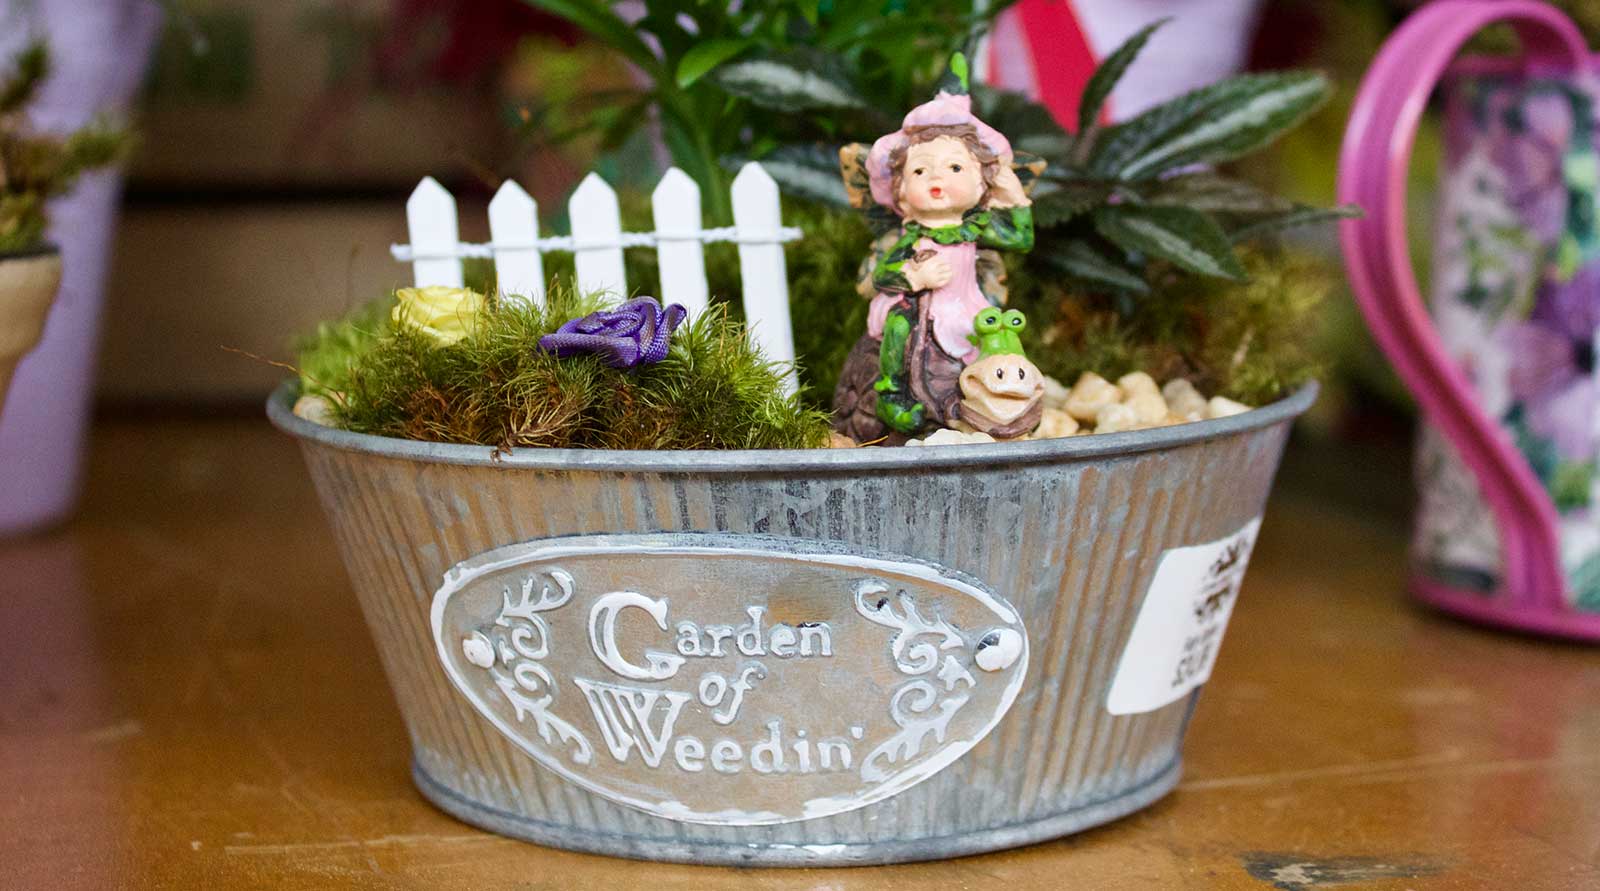 Seasonal Color Container Gardening - Mothers Day Gifts